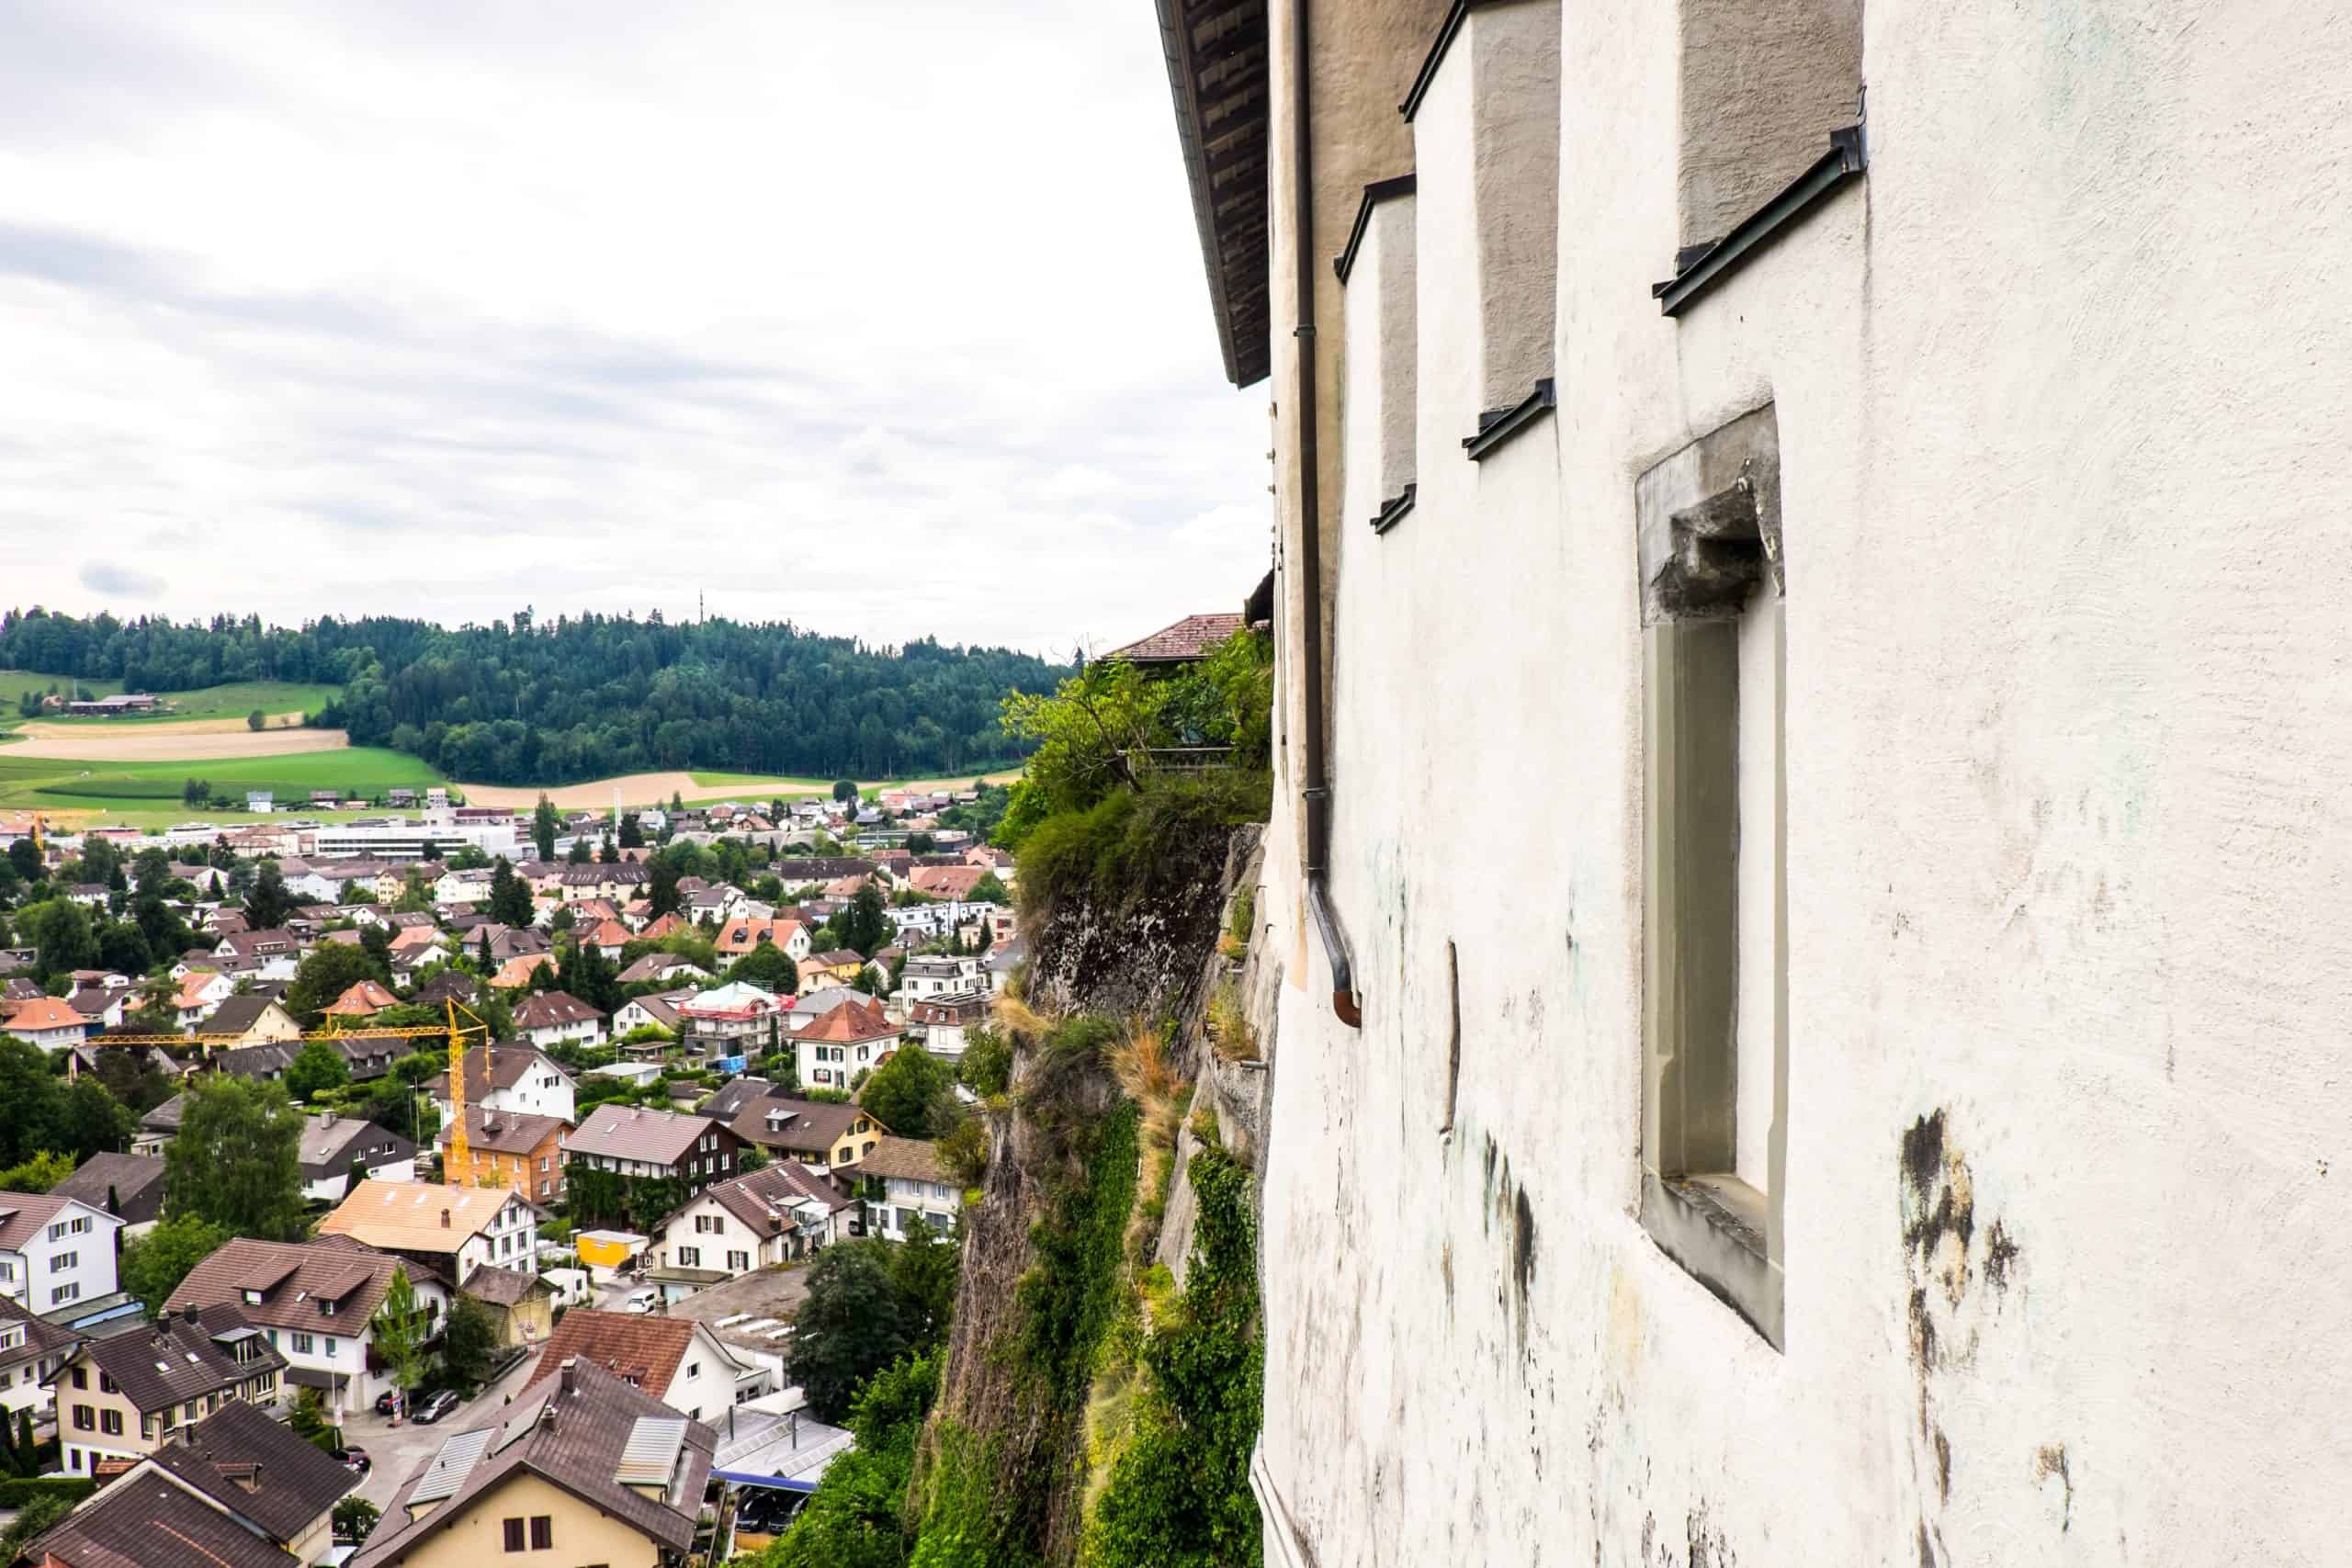 Village views from the white walls of Burgdorf castle on a day trip from Bern